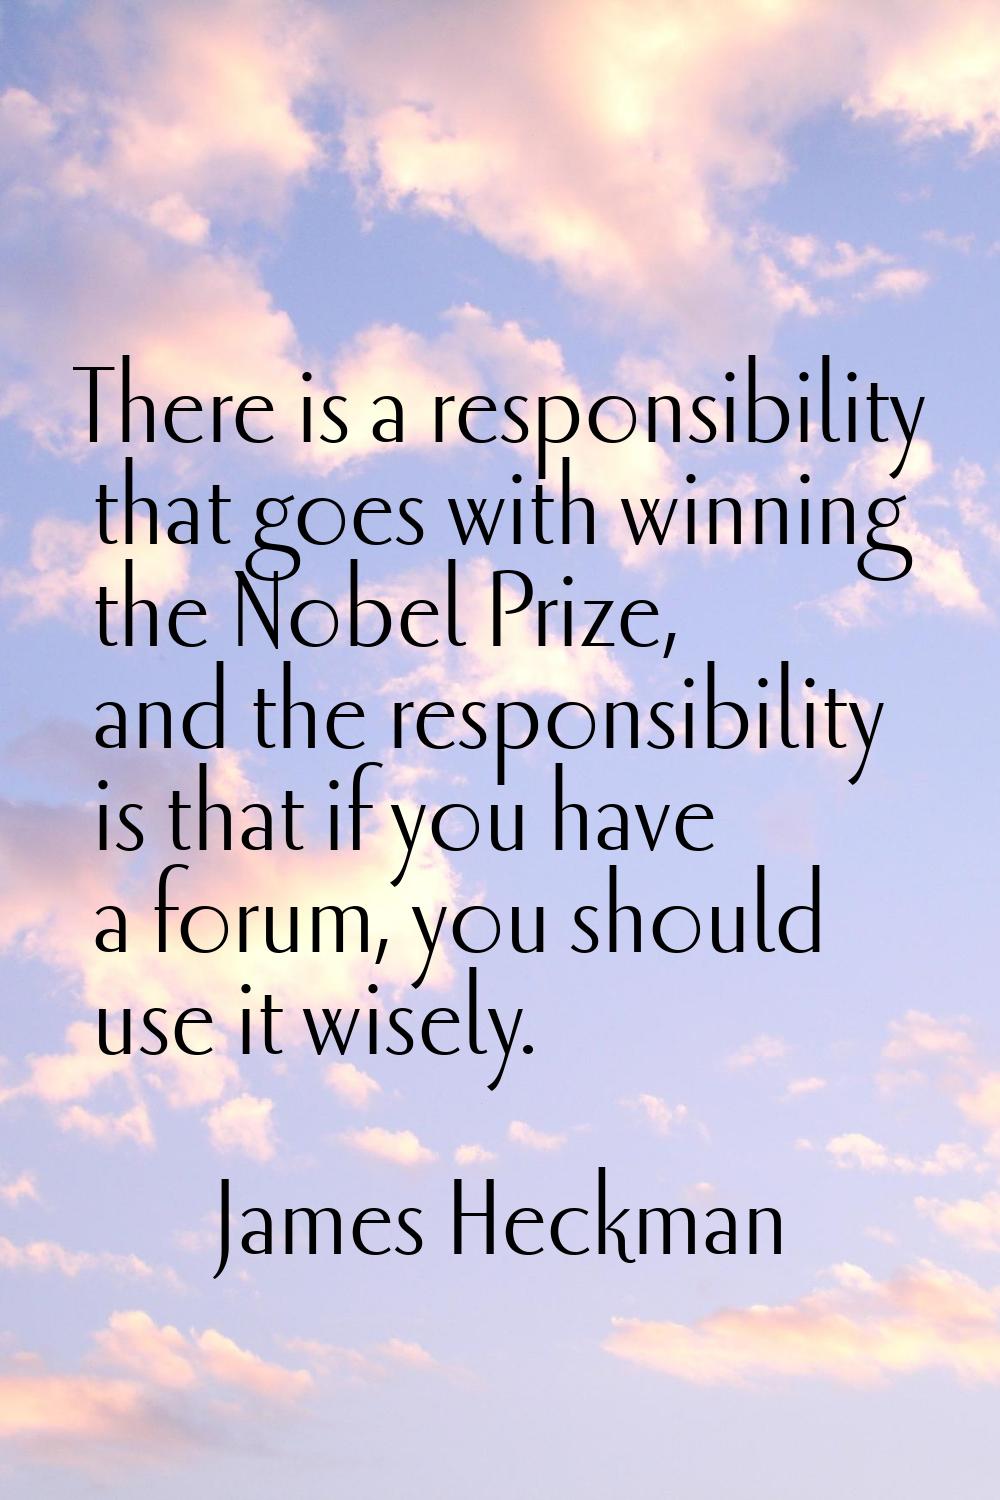 There is a responsibility that goes with winning the Nobel Prize, and the responsibility is that if